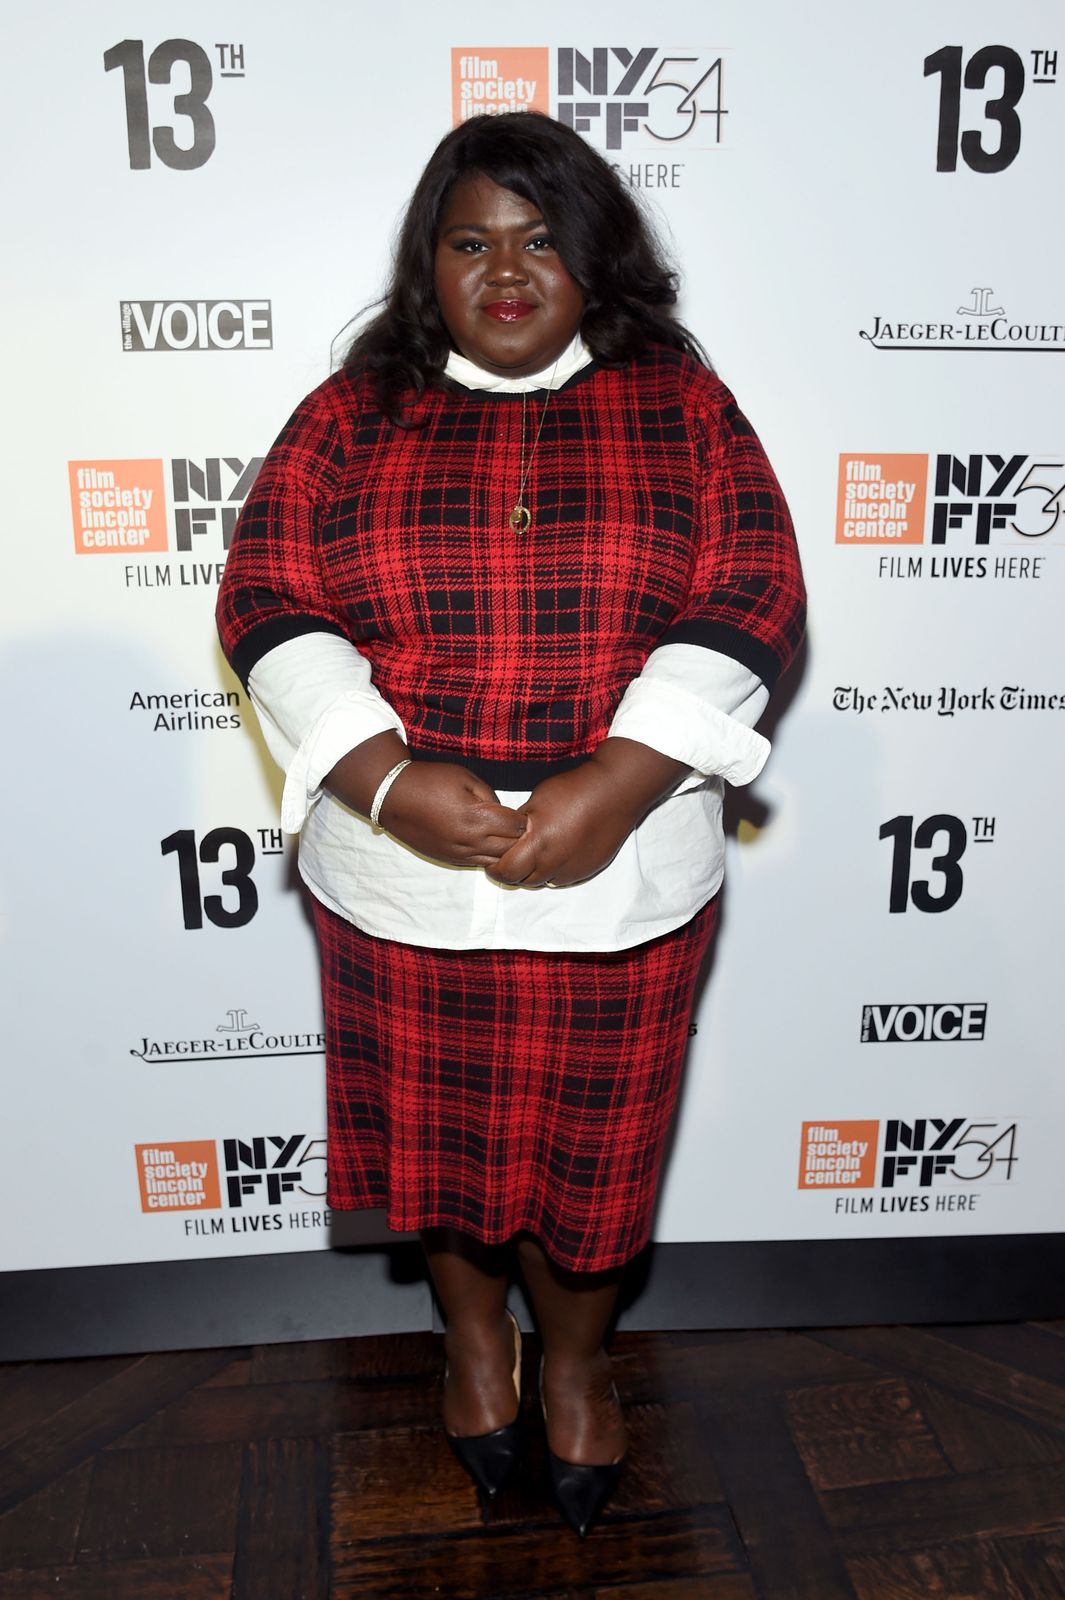 Gabourey Sidibe at the New York Film Festival Opening Night Party on September 30, 2016 in New York City | Photo: Getty Images